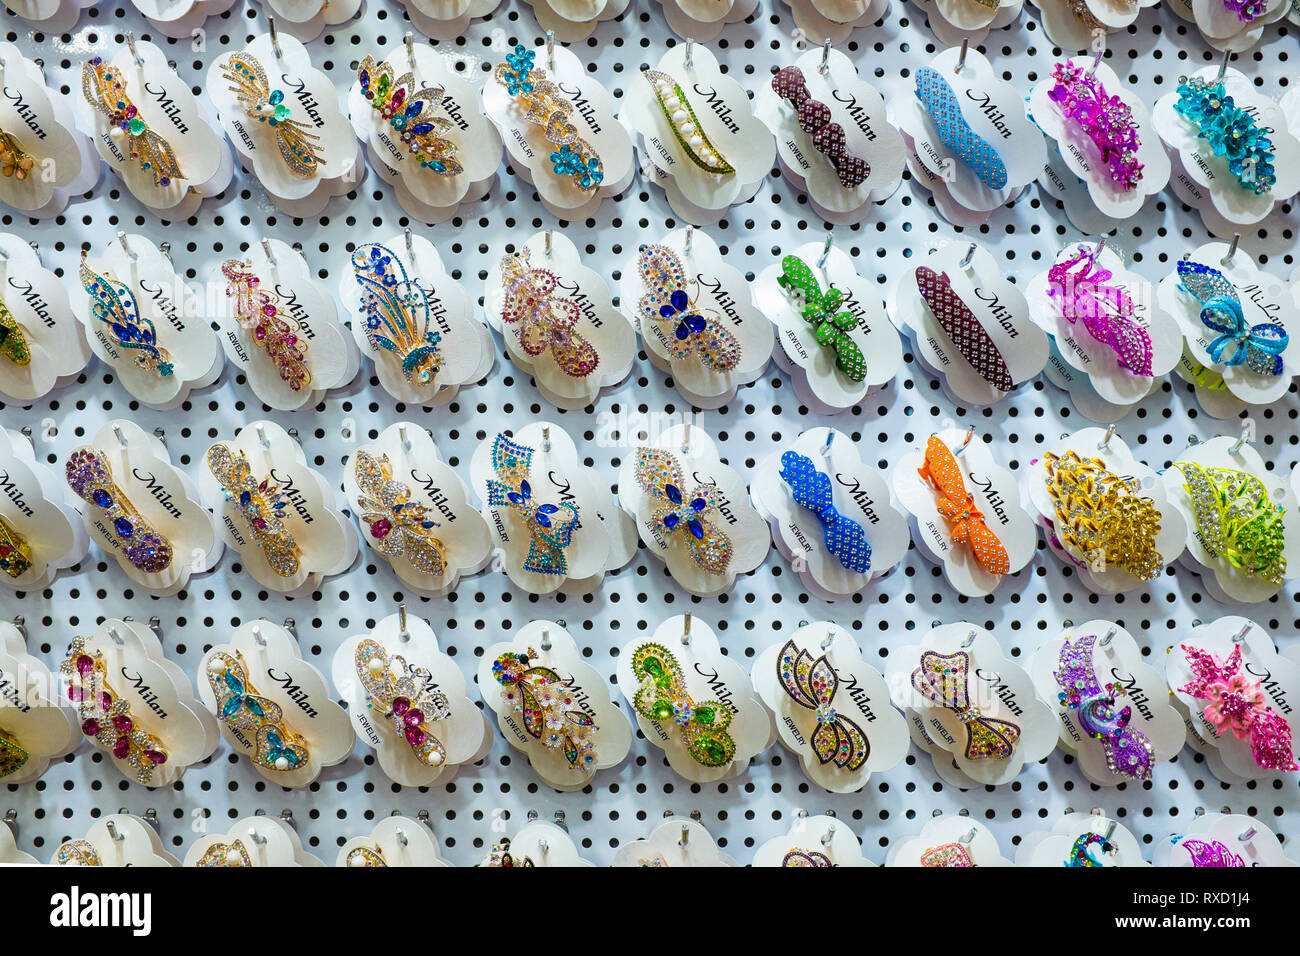 Wall display of colourful hair clips for sale, Little India Singapore Stock Photo